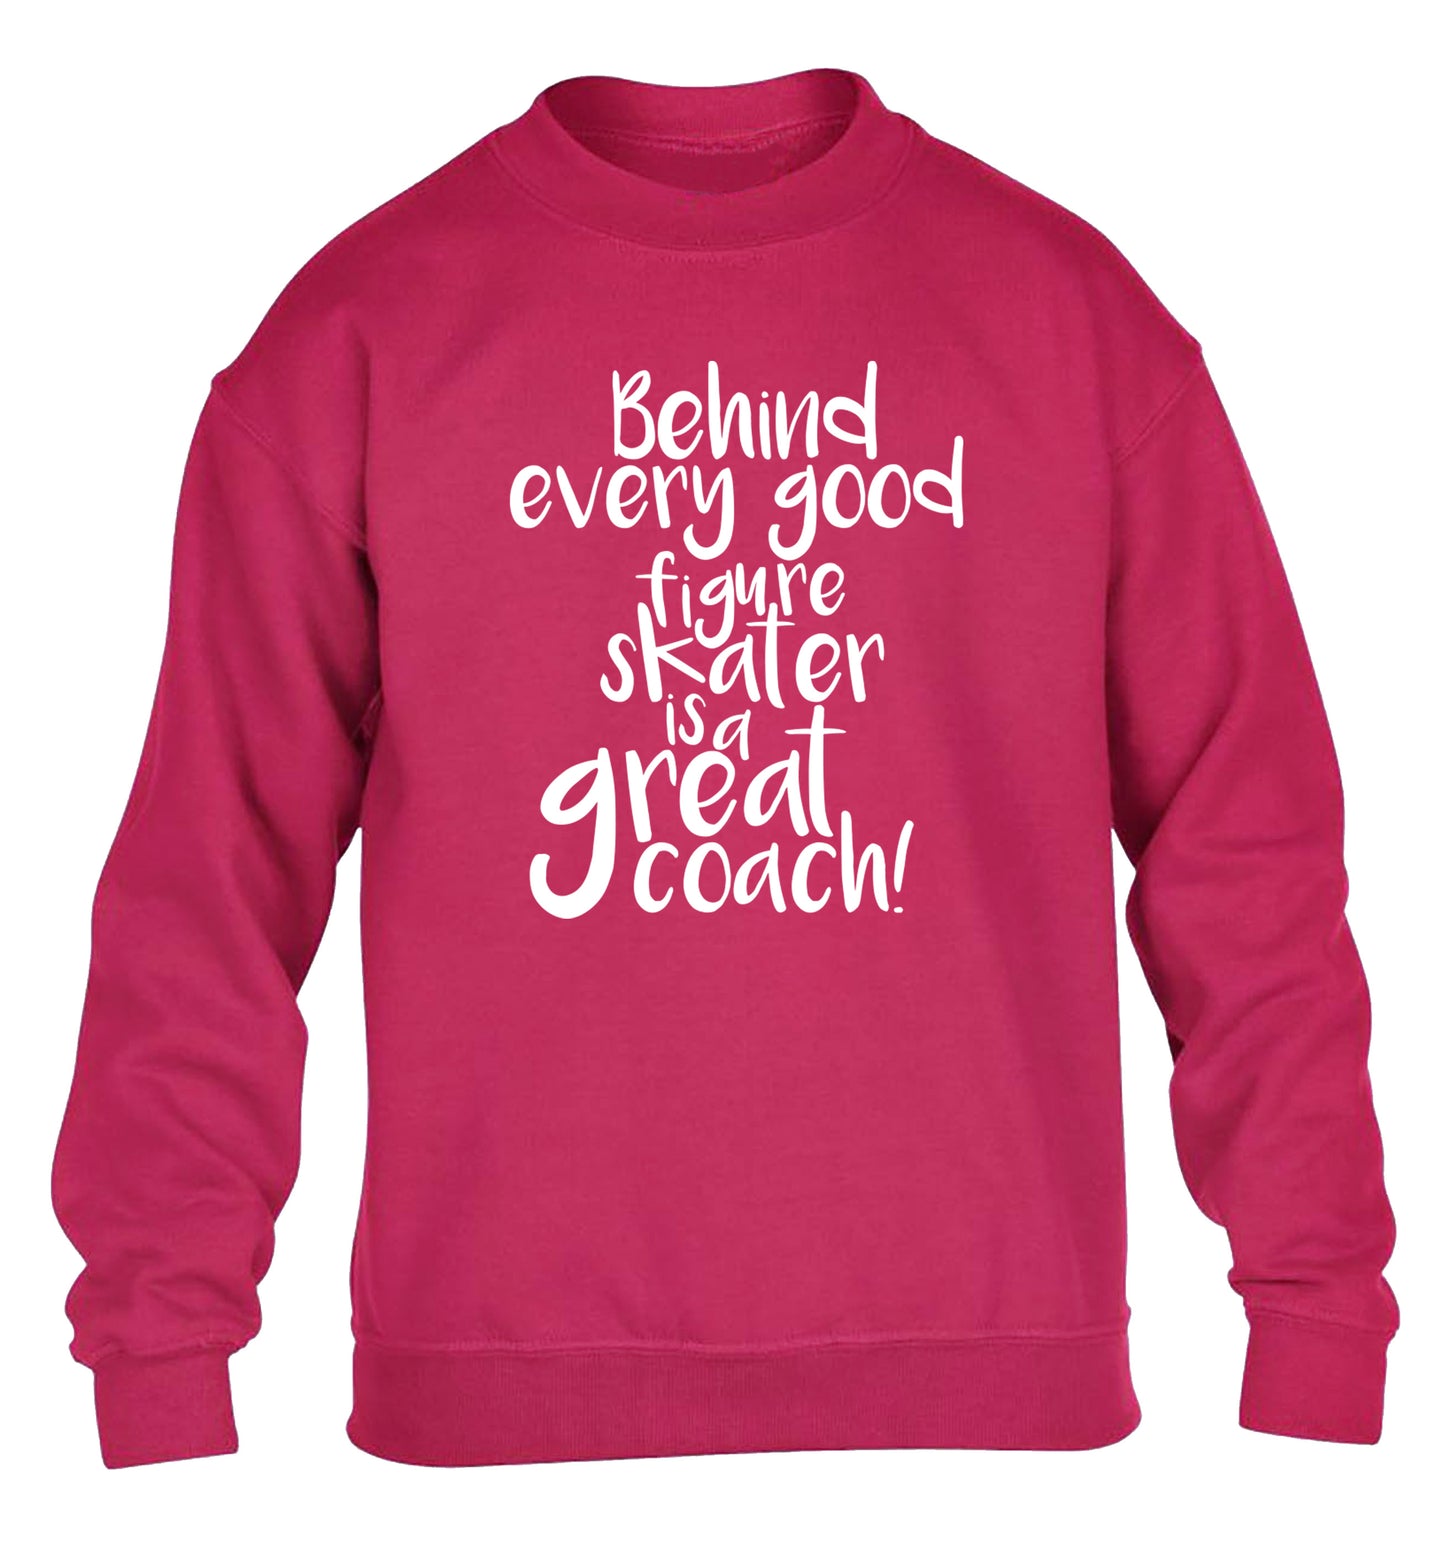 Behind every good figure skater is a great coach children's pink sweater 12-14 Years